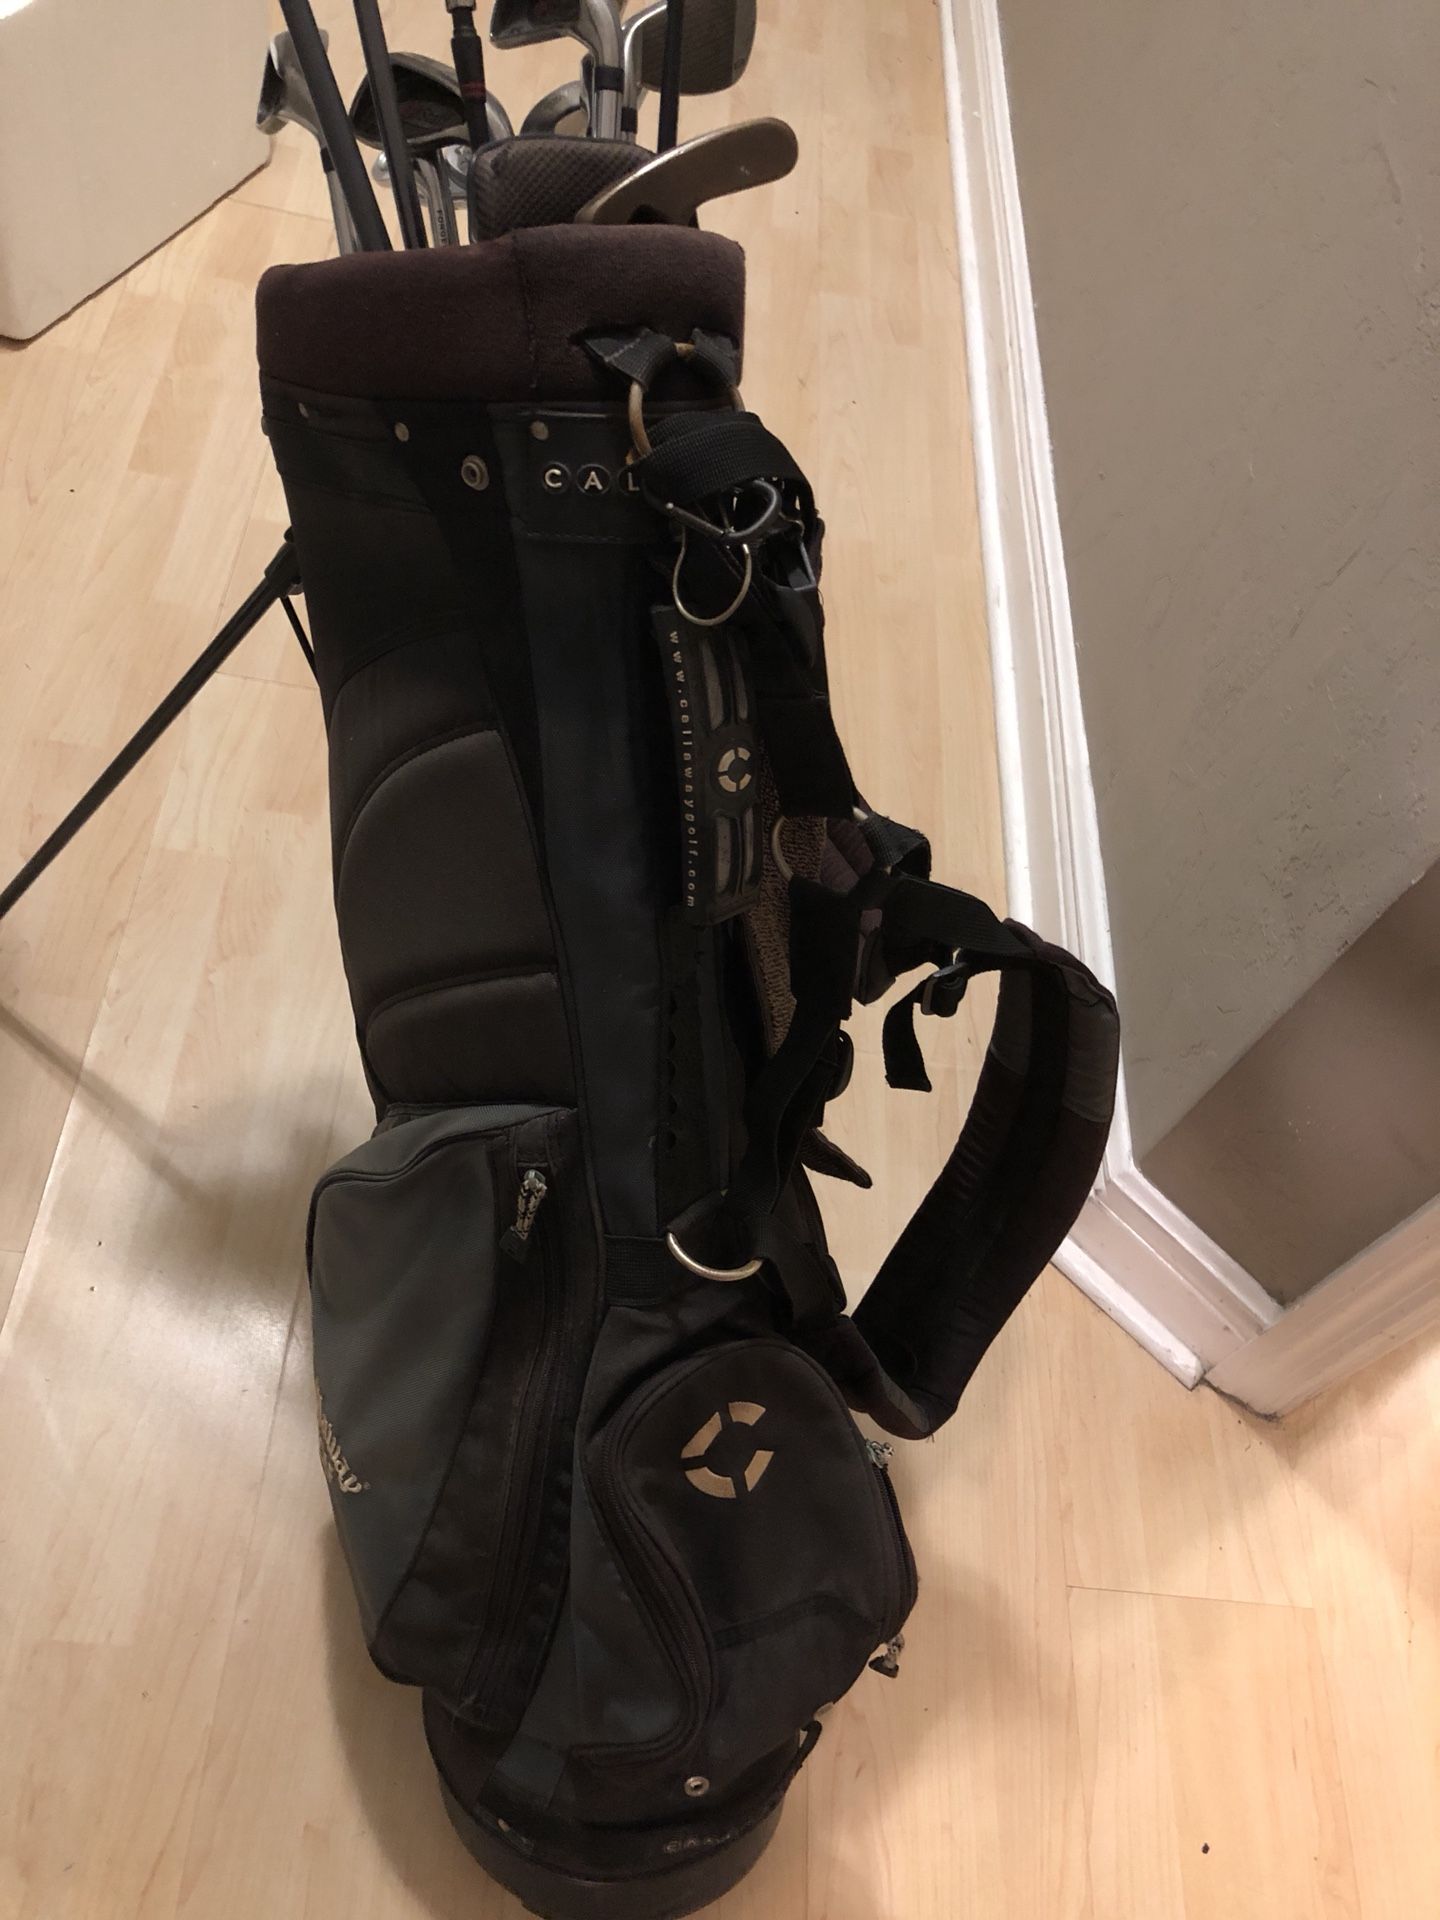 Complete set of men’s right handed golf clubs with bag